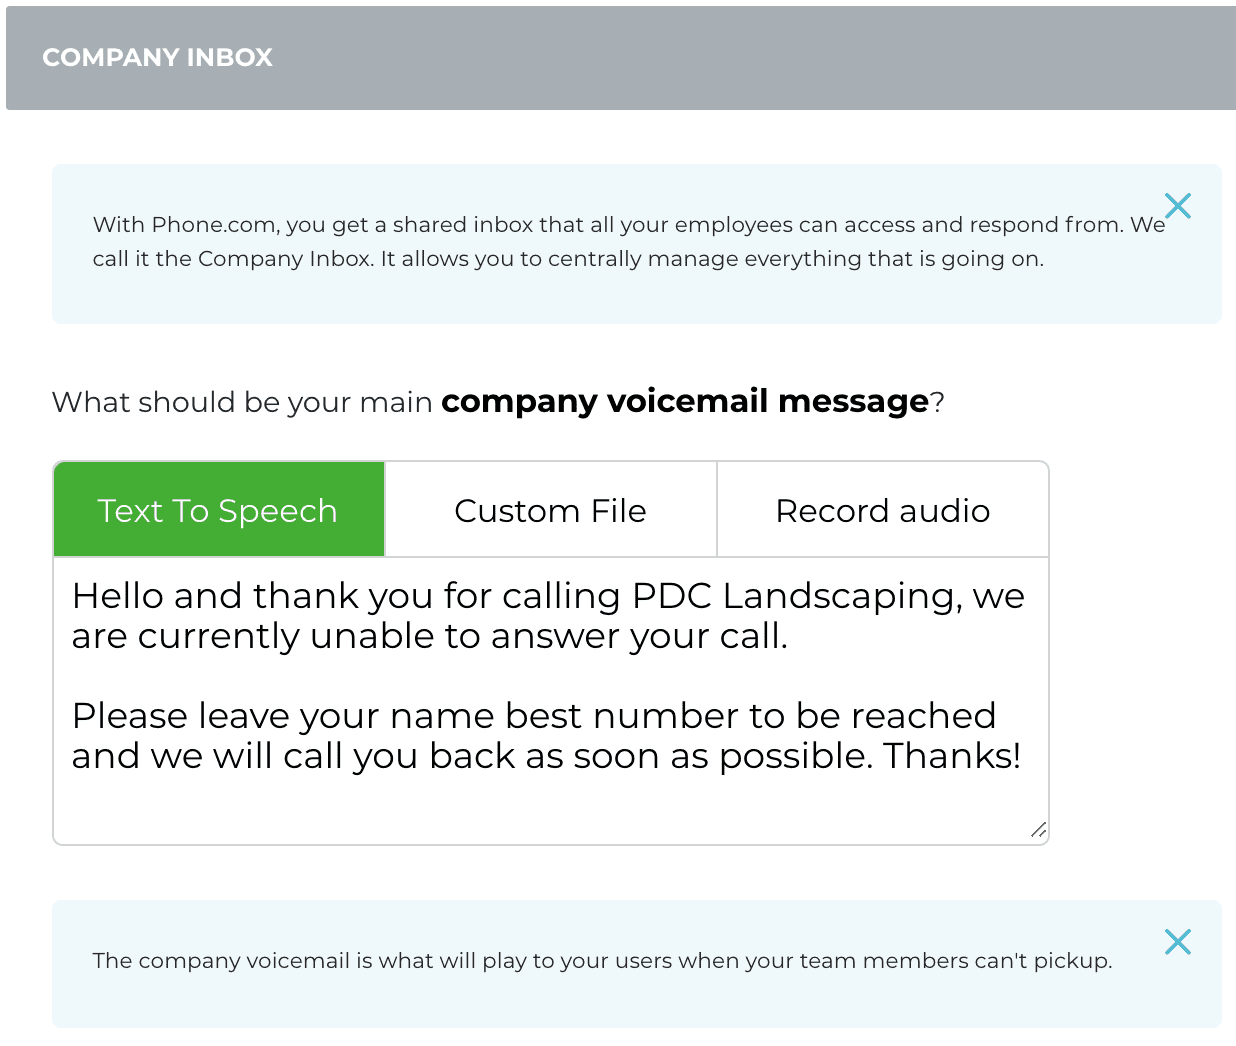 Three ways to set up your voicemail greeting for the company inbox via Phone.com.